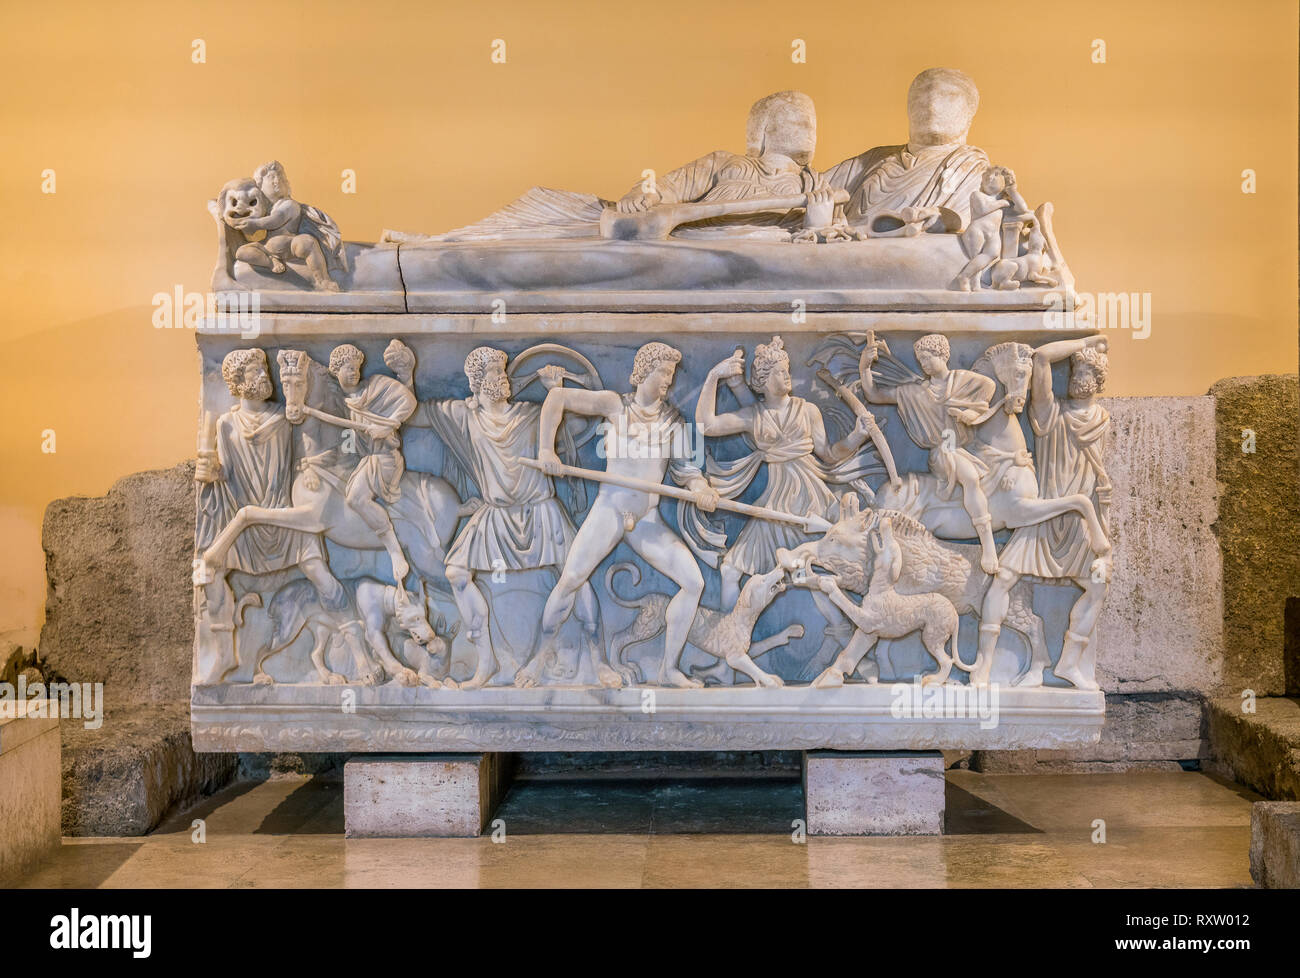 Ancient marble sarcophagus in the Capitoline Museums in Rome, Italy. Stock Photo